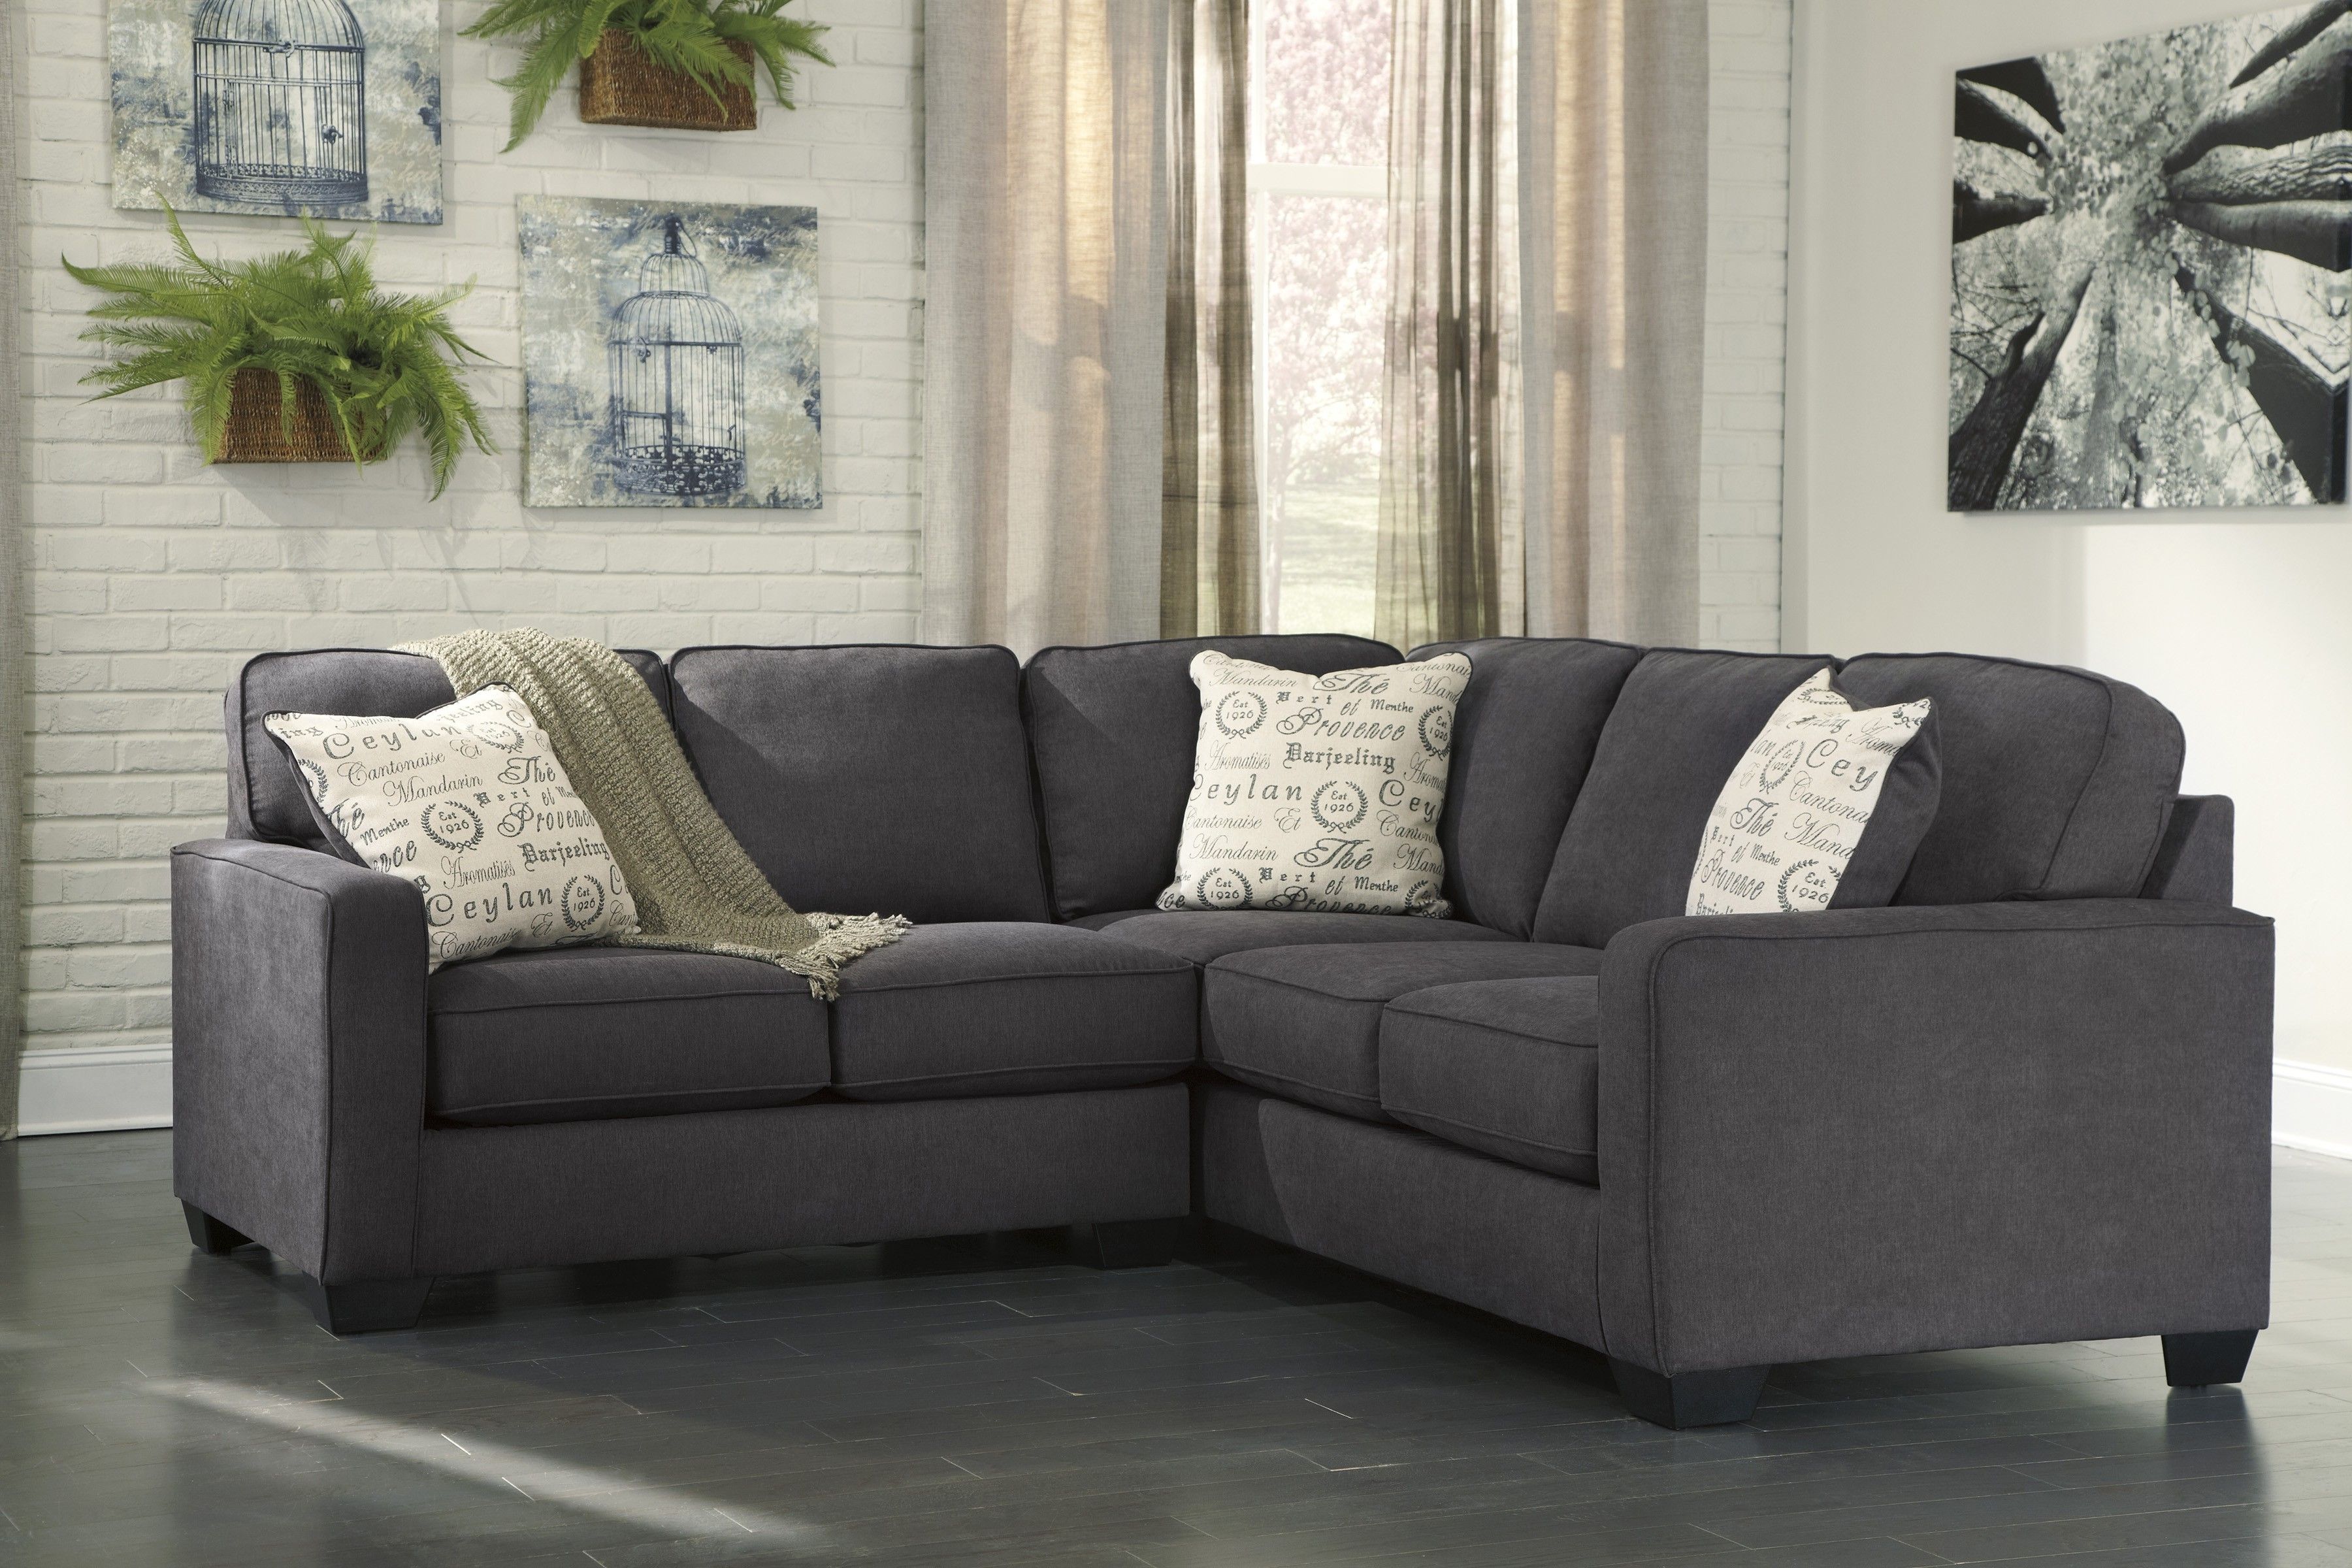 Preferred Interior: 2 Piece Sectional Sofa (View 8 of 15)